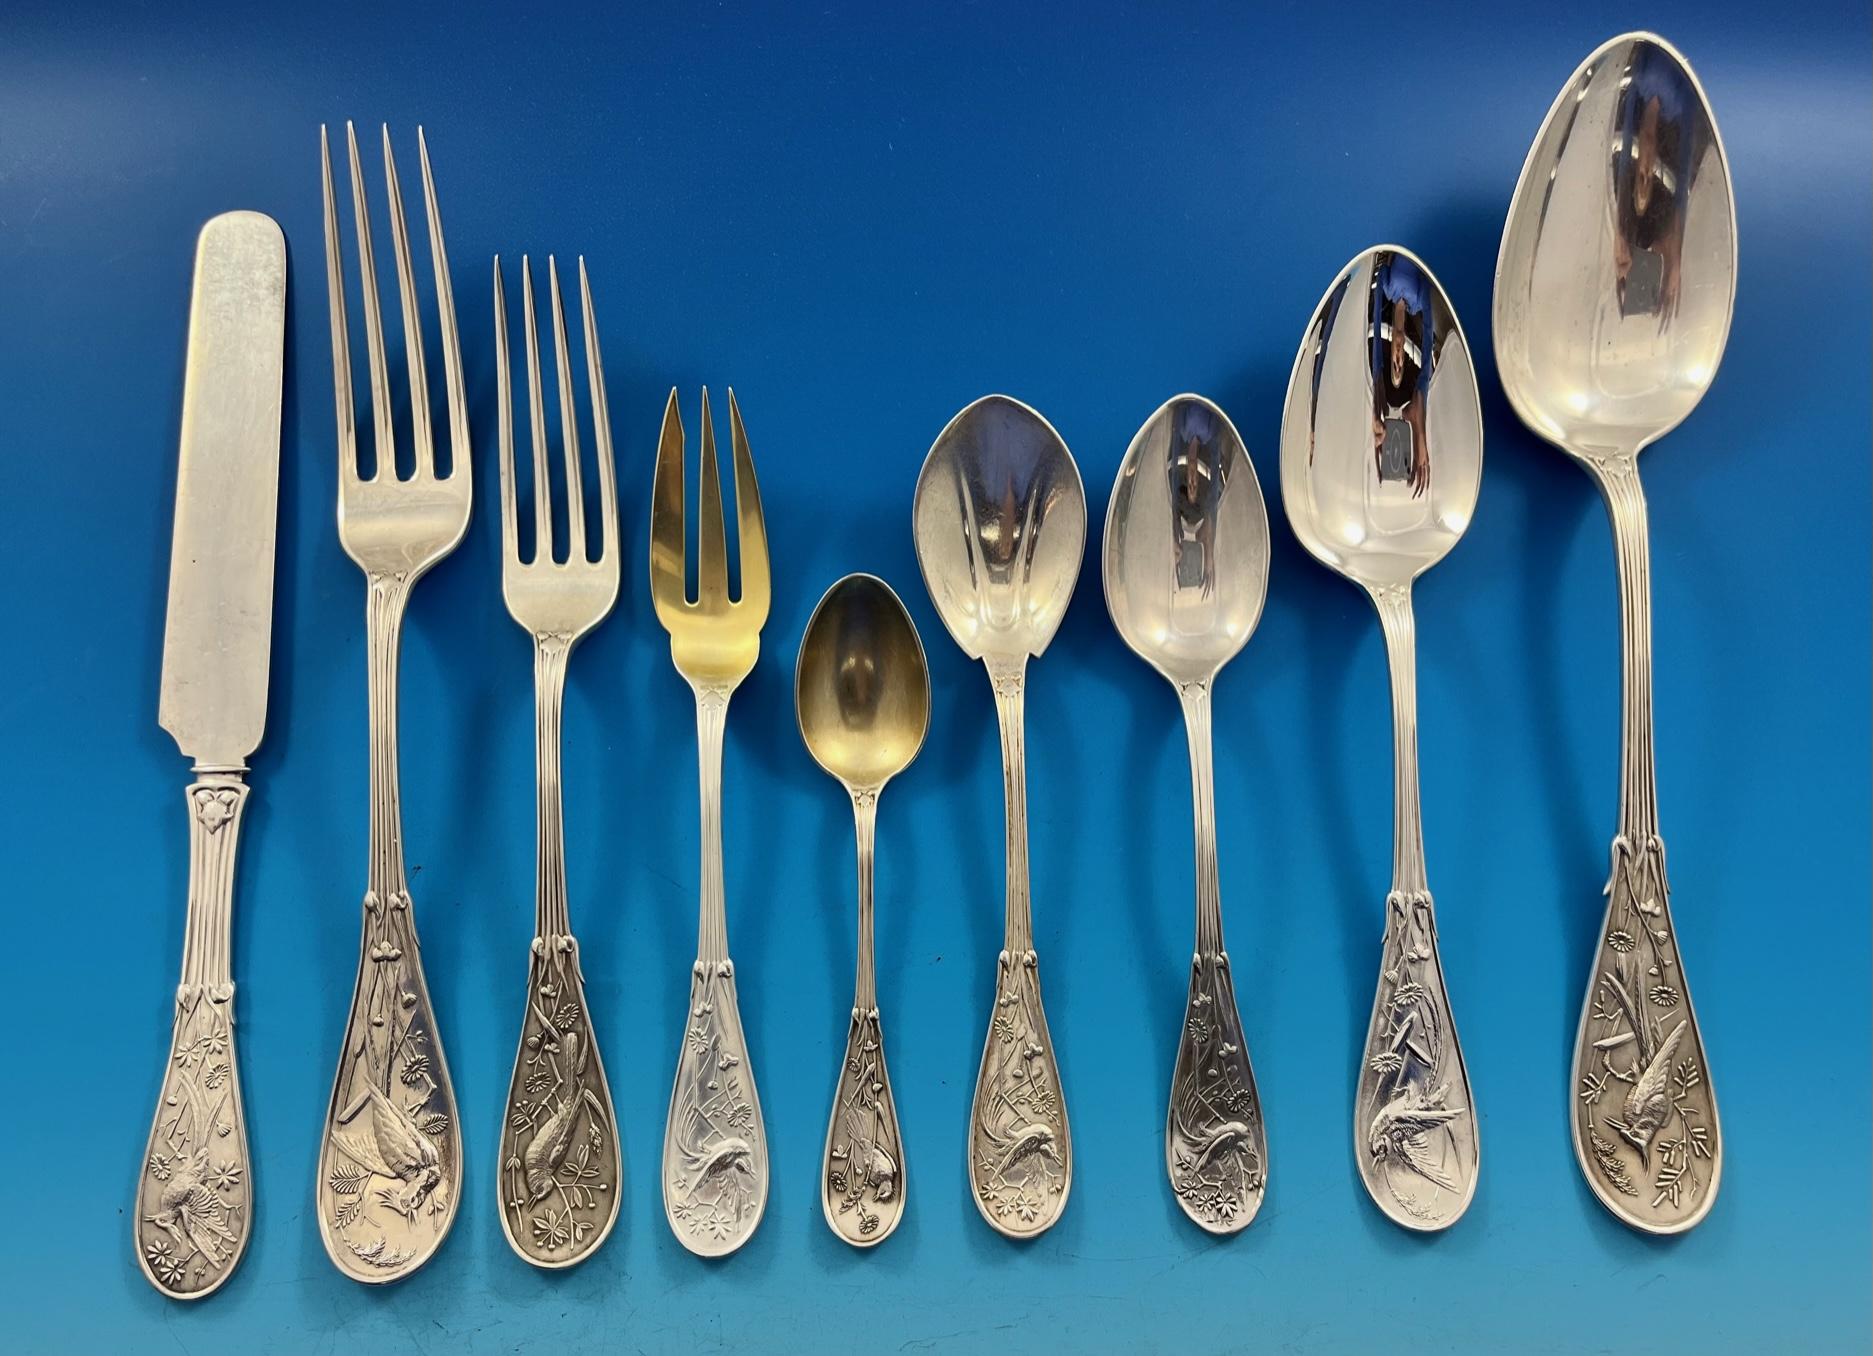 Exceptional antique late-19th century multi-motif Japanese by Tiffany & Co. sterling silver dinner flatware set, 102 pieces. This set includes: 

12 knives, flat handle all-sterling, 8